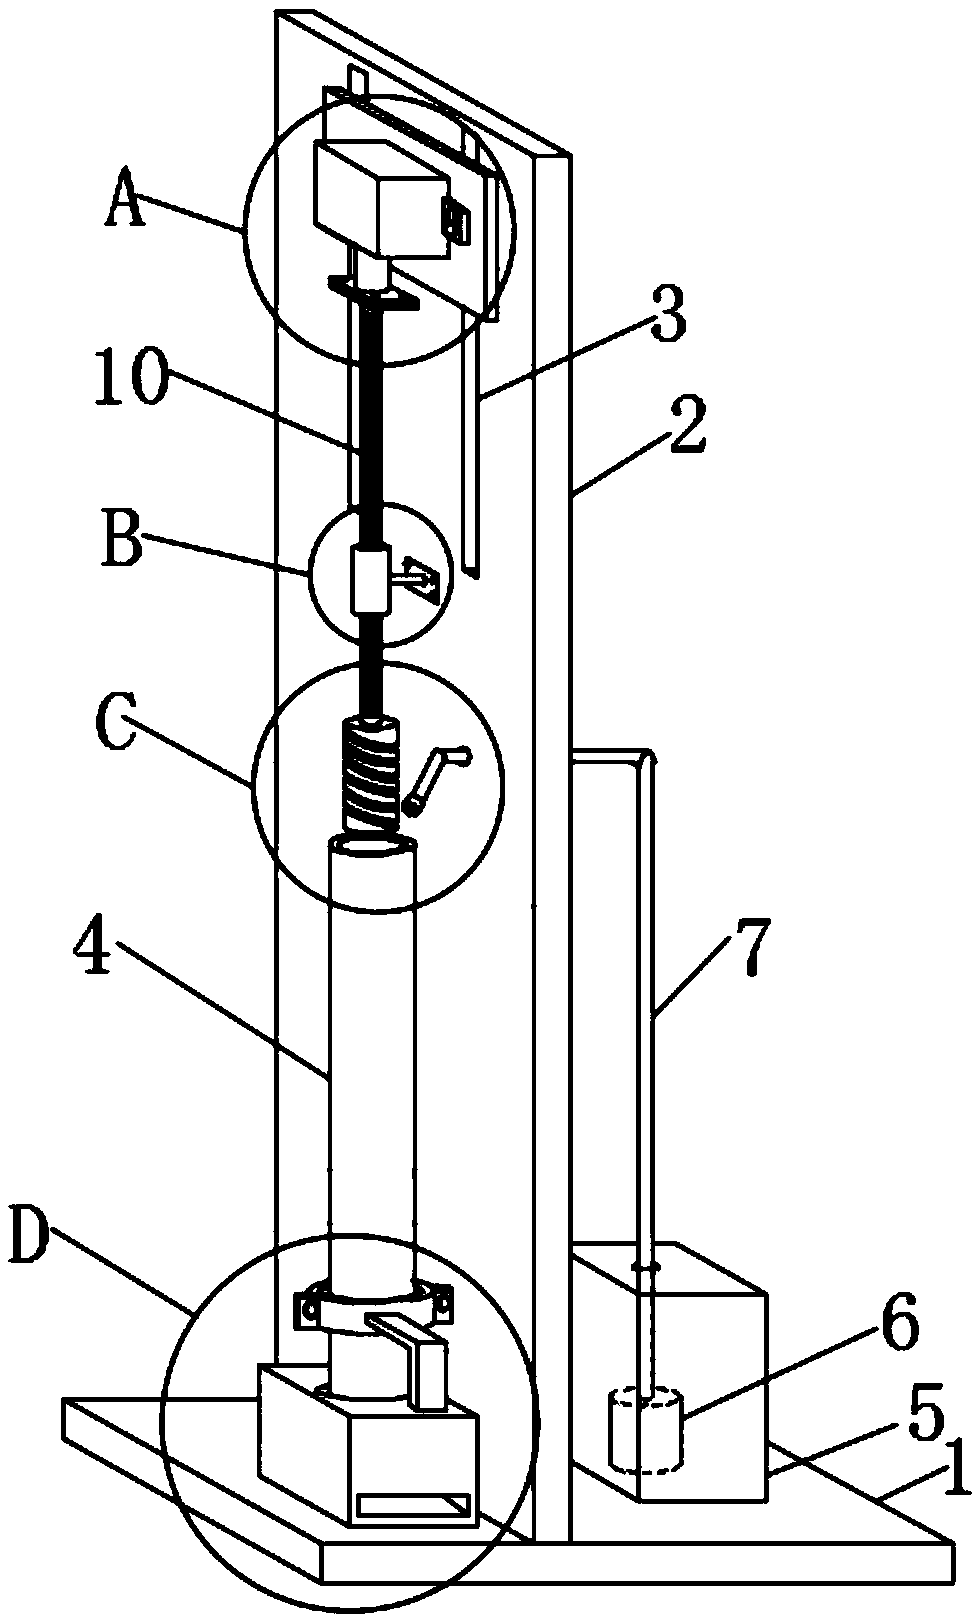 Burr polish-grinding device of metal pipe inner wall